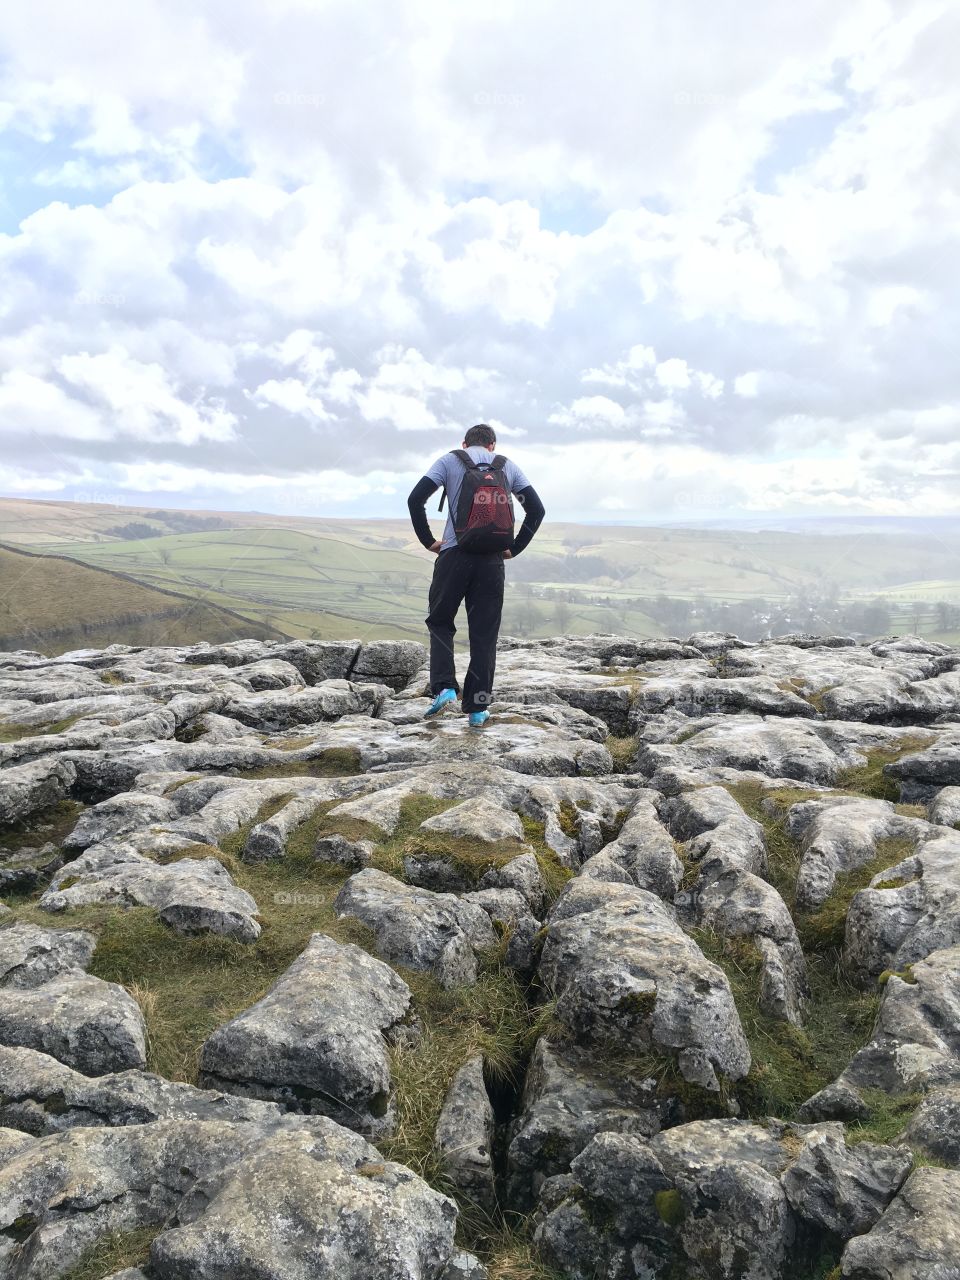 At the top of Malham Cove